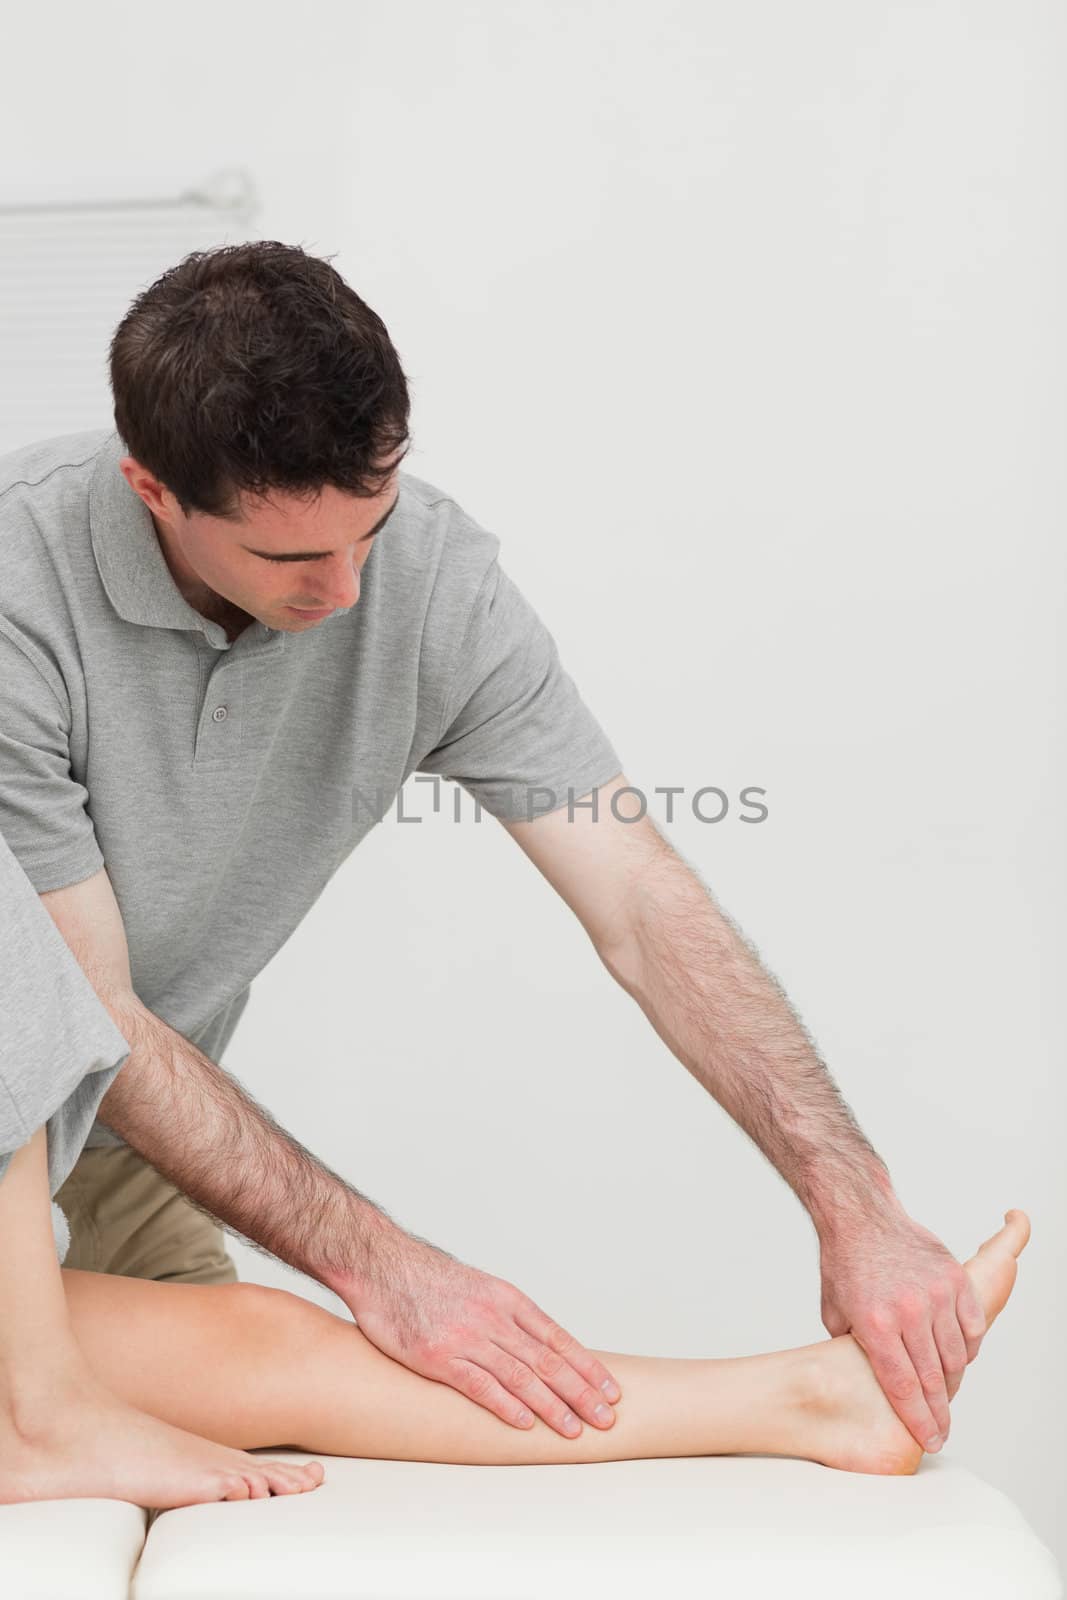 Serious physiotherapist working on the calf of a patient by Wavebreakmedia